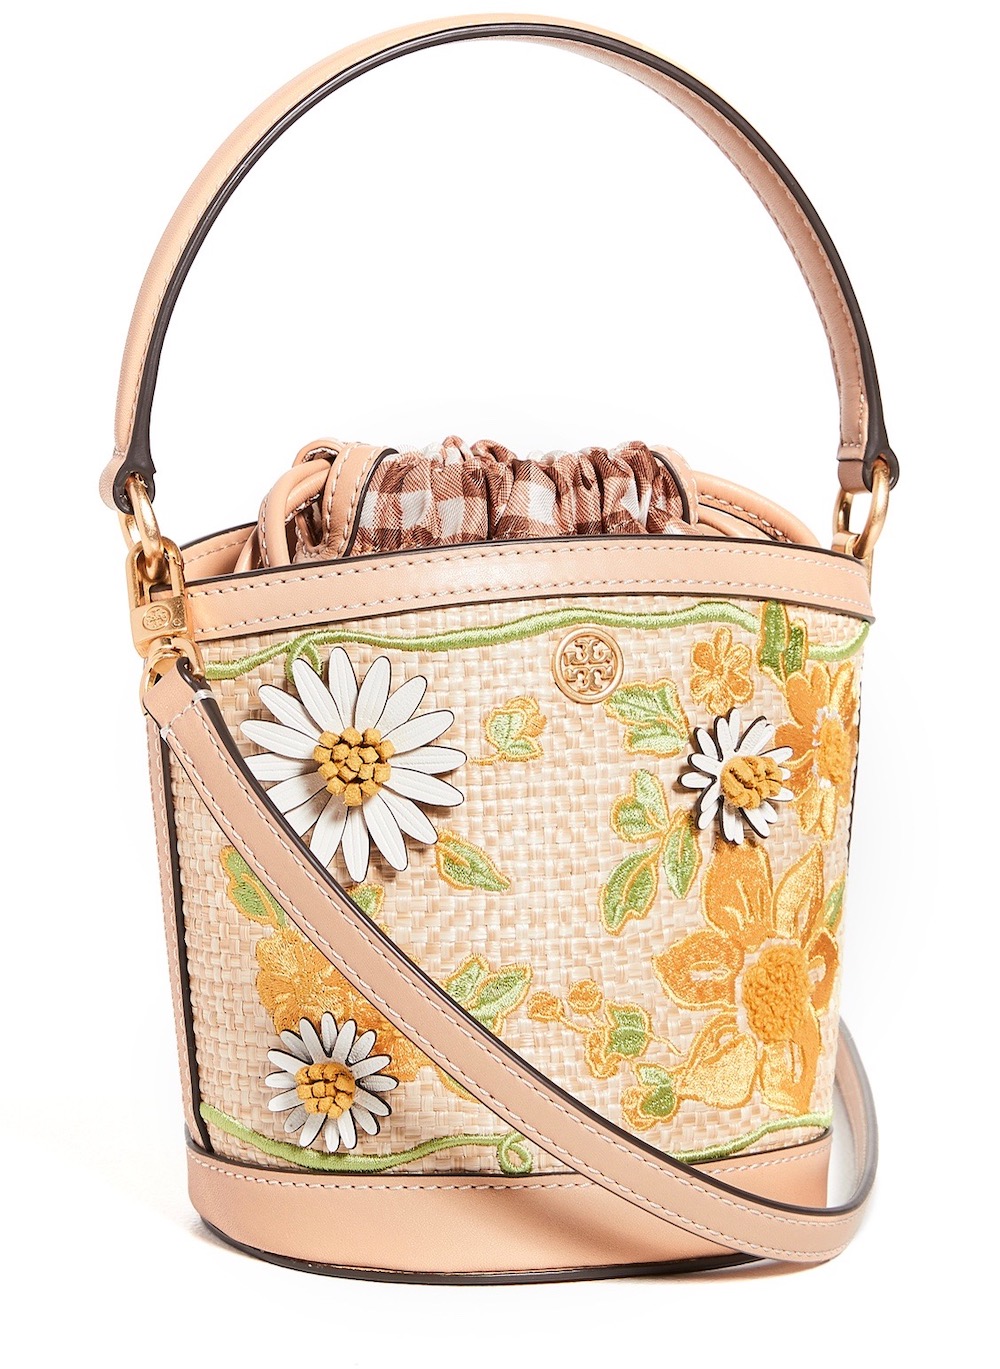 Floral Bucket Bag Inspired by Tory Burch